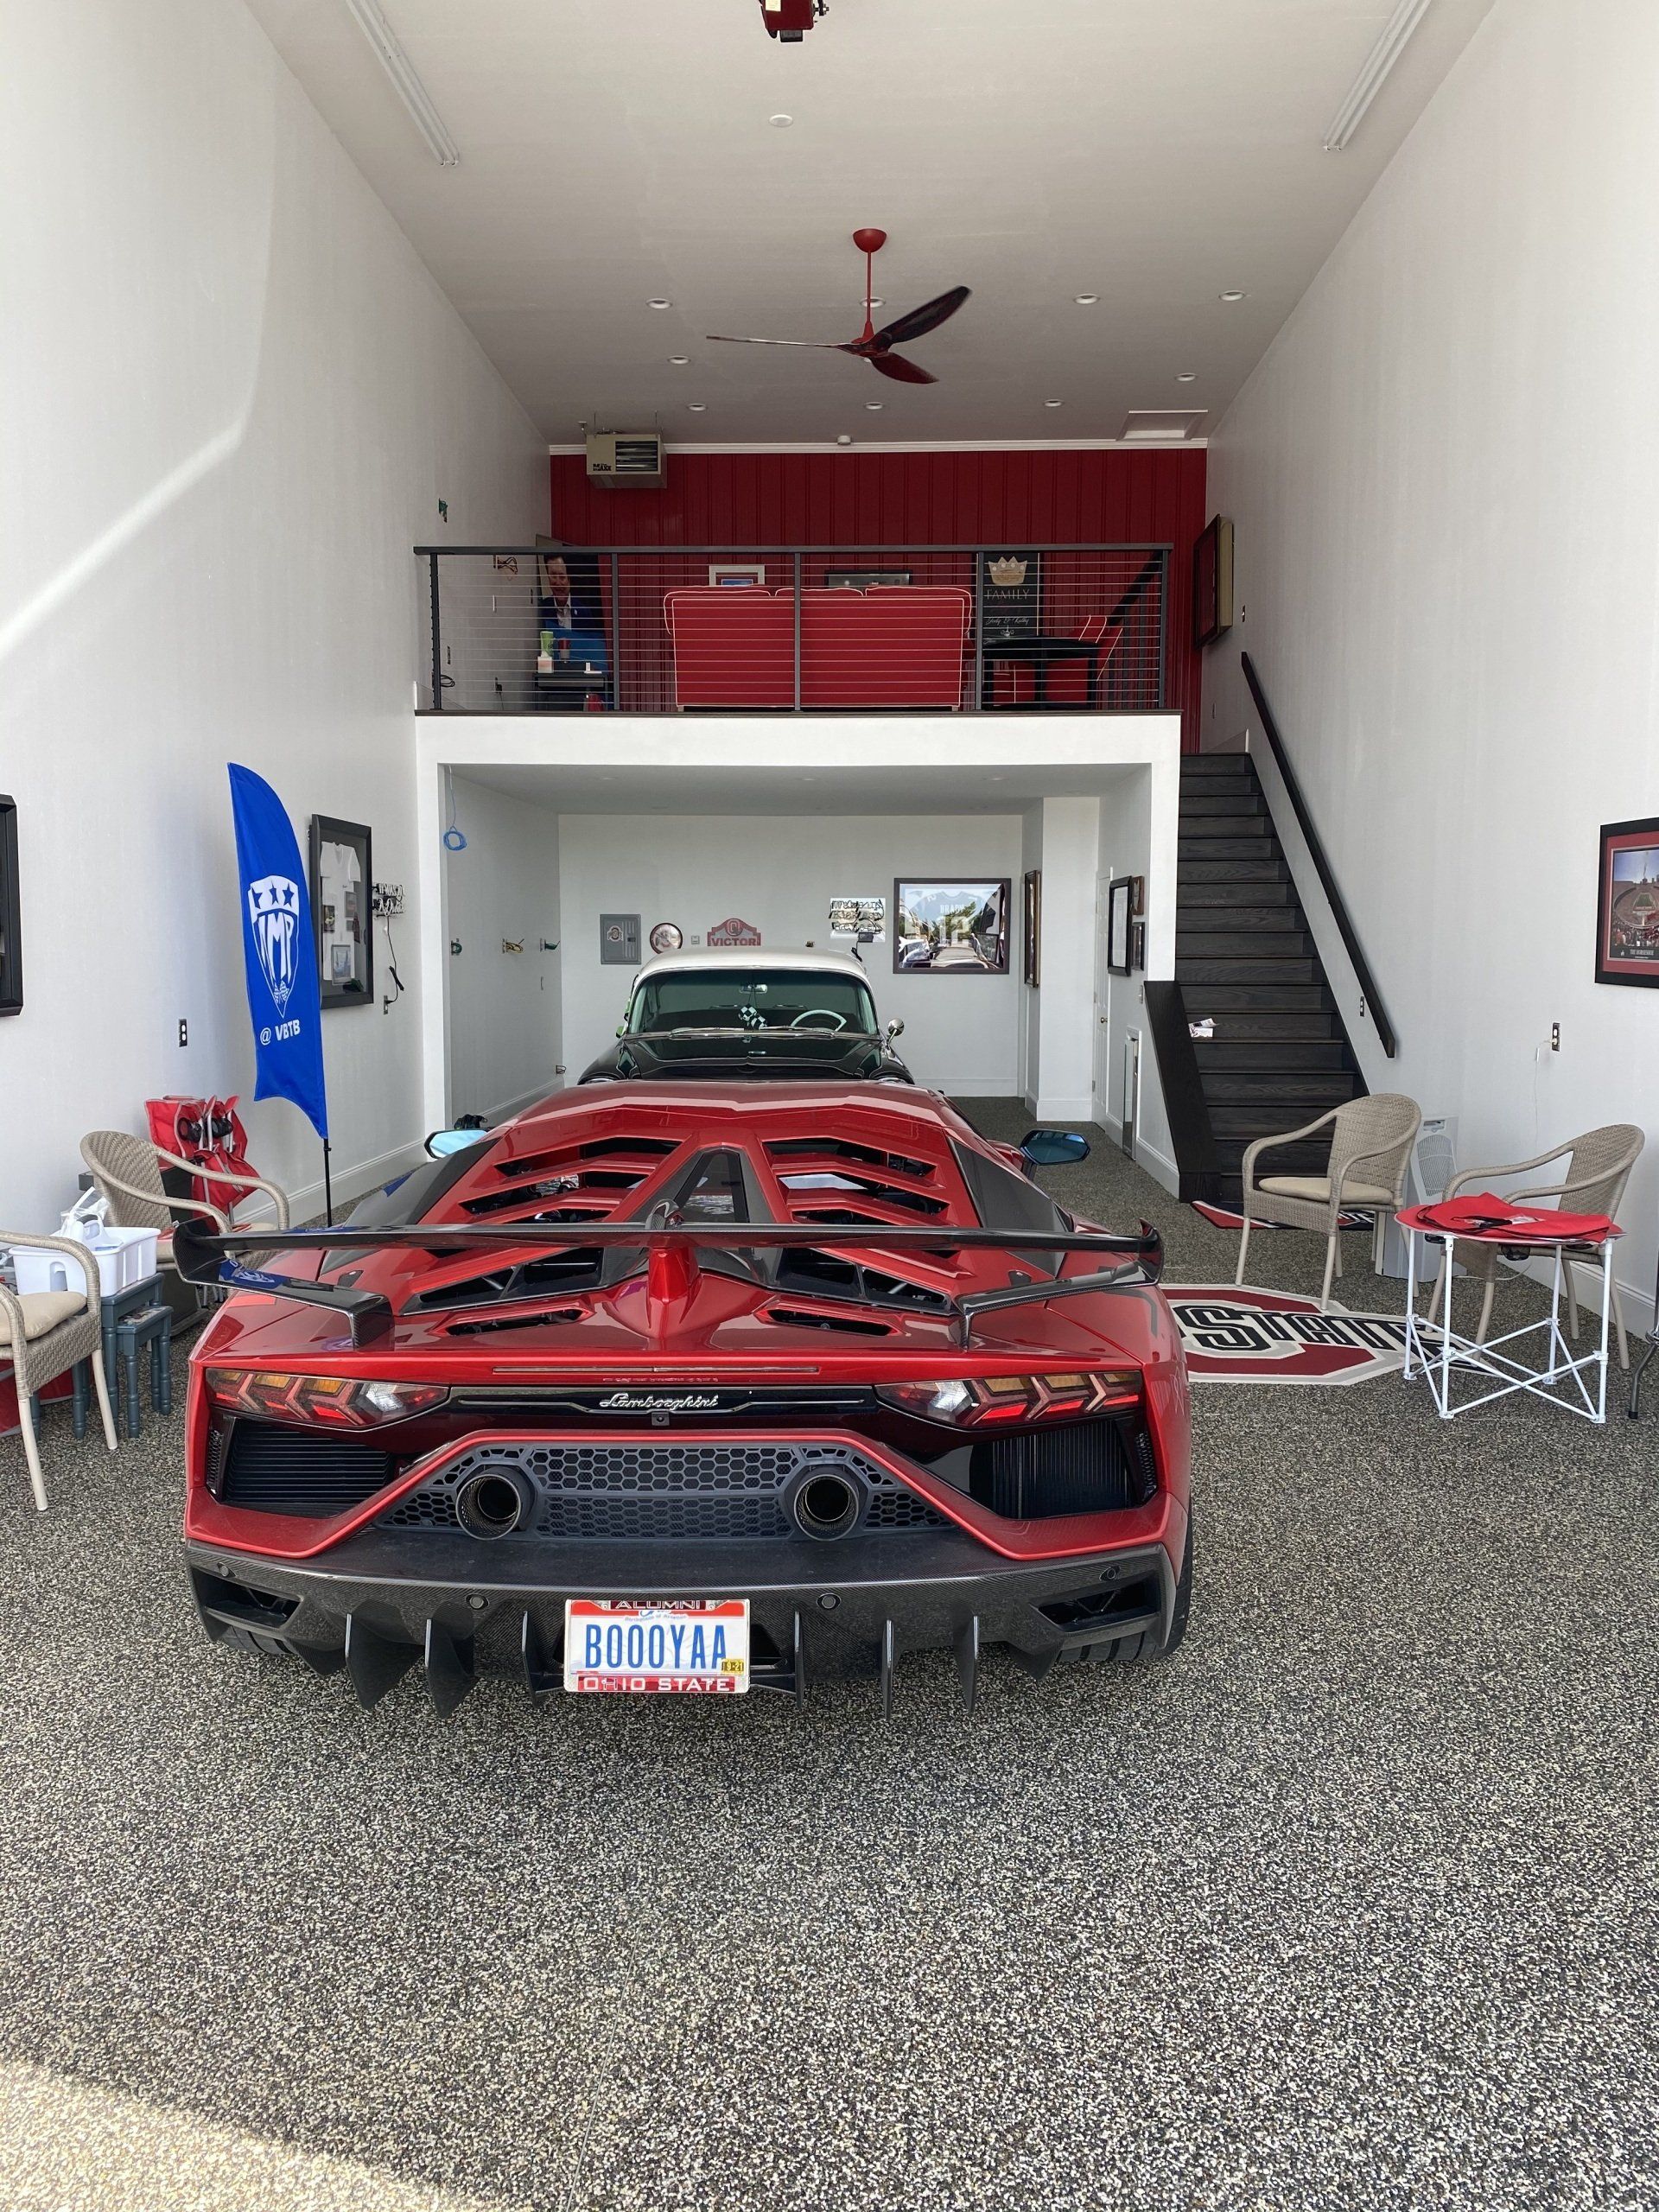 a red sports car is parked in a garage with a california license plate